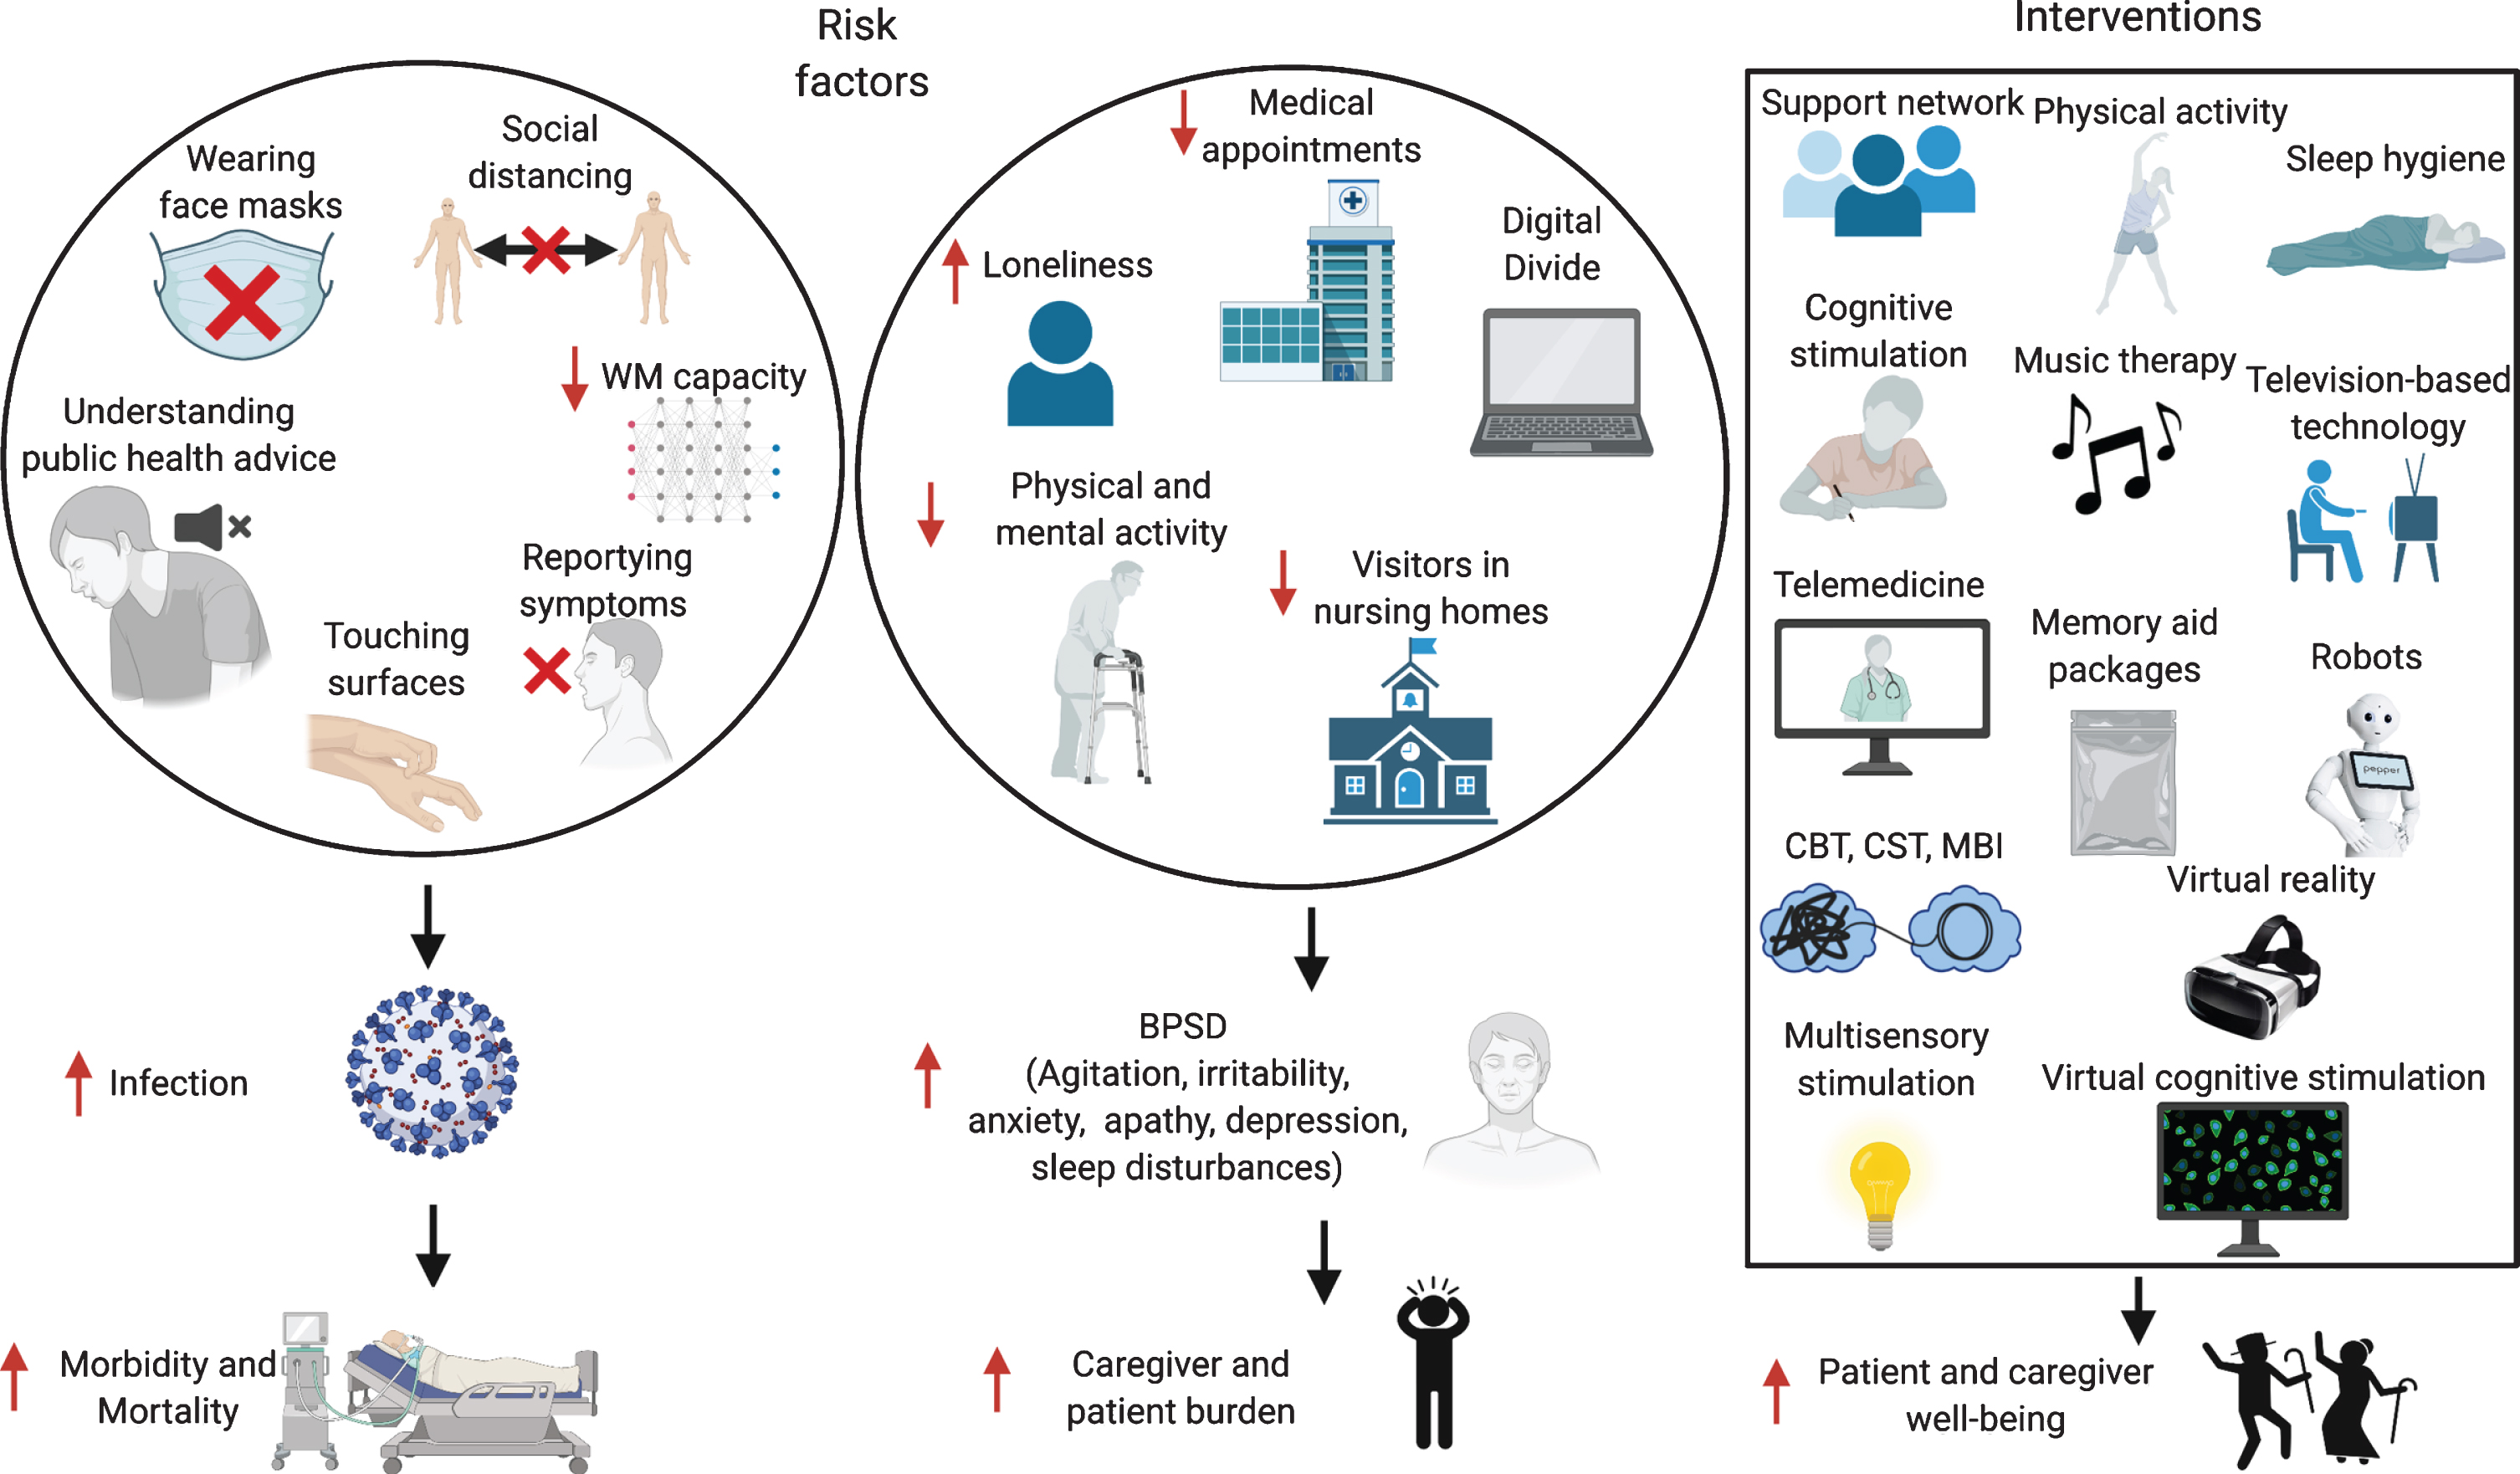 Risk factors for increased infection rates and BPSD in patients with dementia, and possible interventions. WM, working memory; BPSD, behavioral and psychological symptoms of dementia; CBT, Cognitive Behavioral Therapy; CST, Cognitive Stimulation Therapy; MBI, Mindfulness-Based Intervention. Made in ©BioRender - biorender.com.